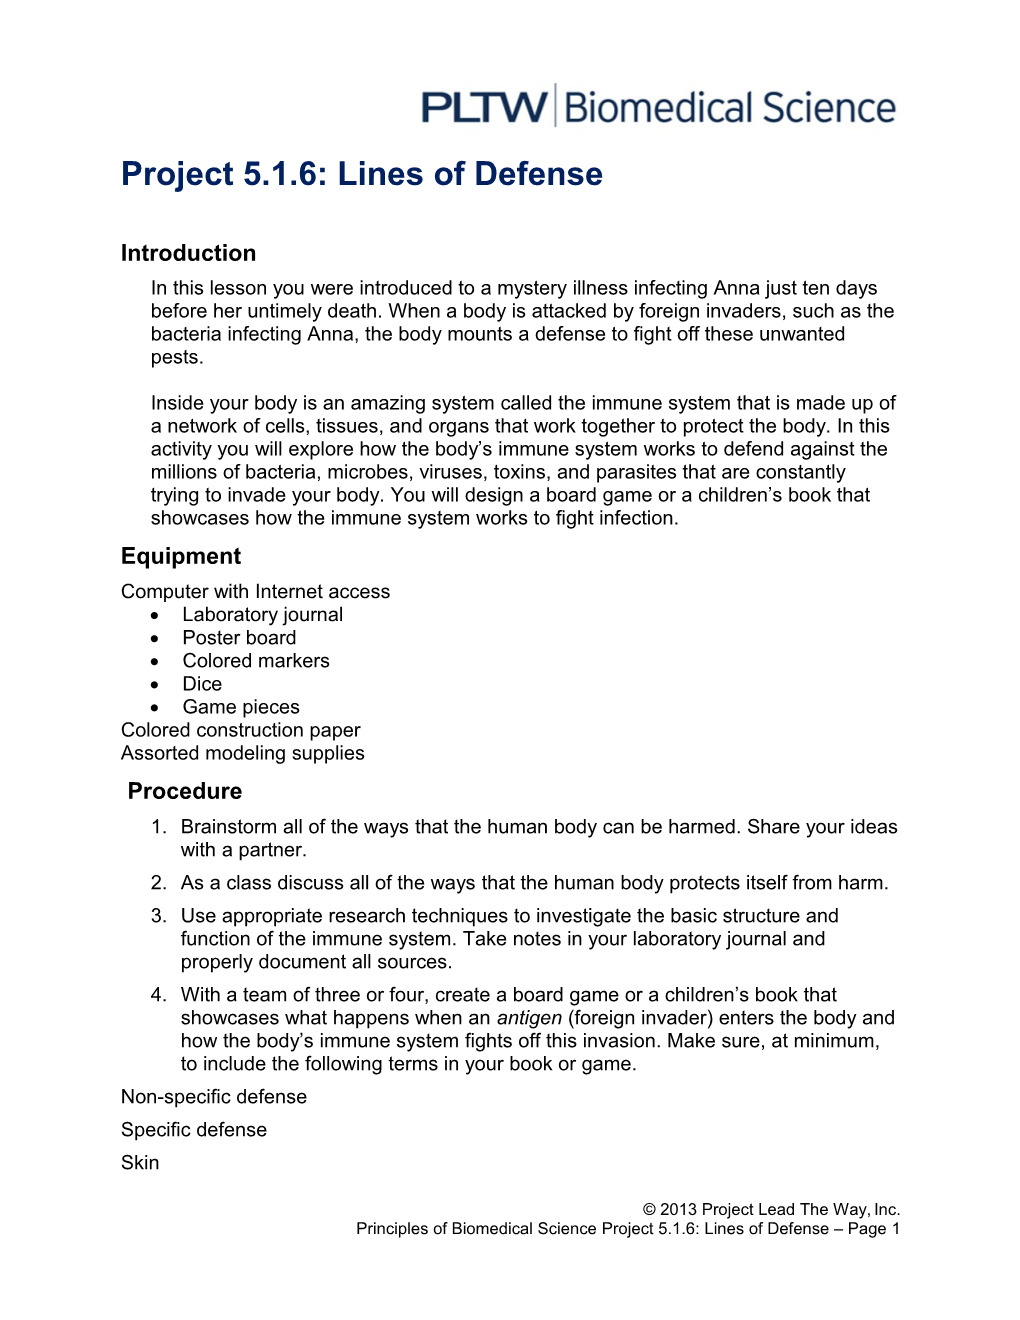 Project 5.1.6: Lines of Defense